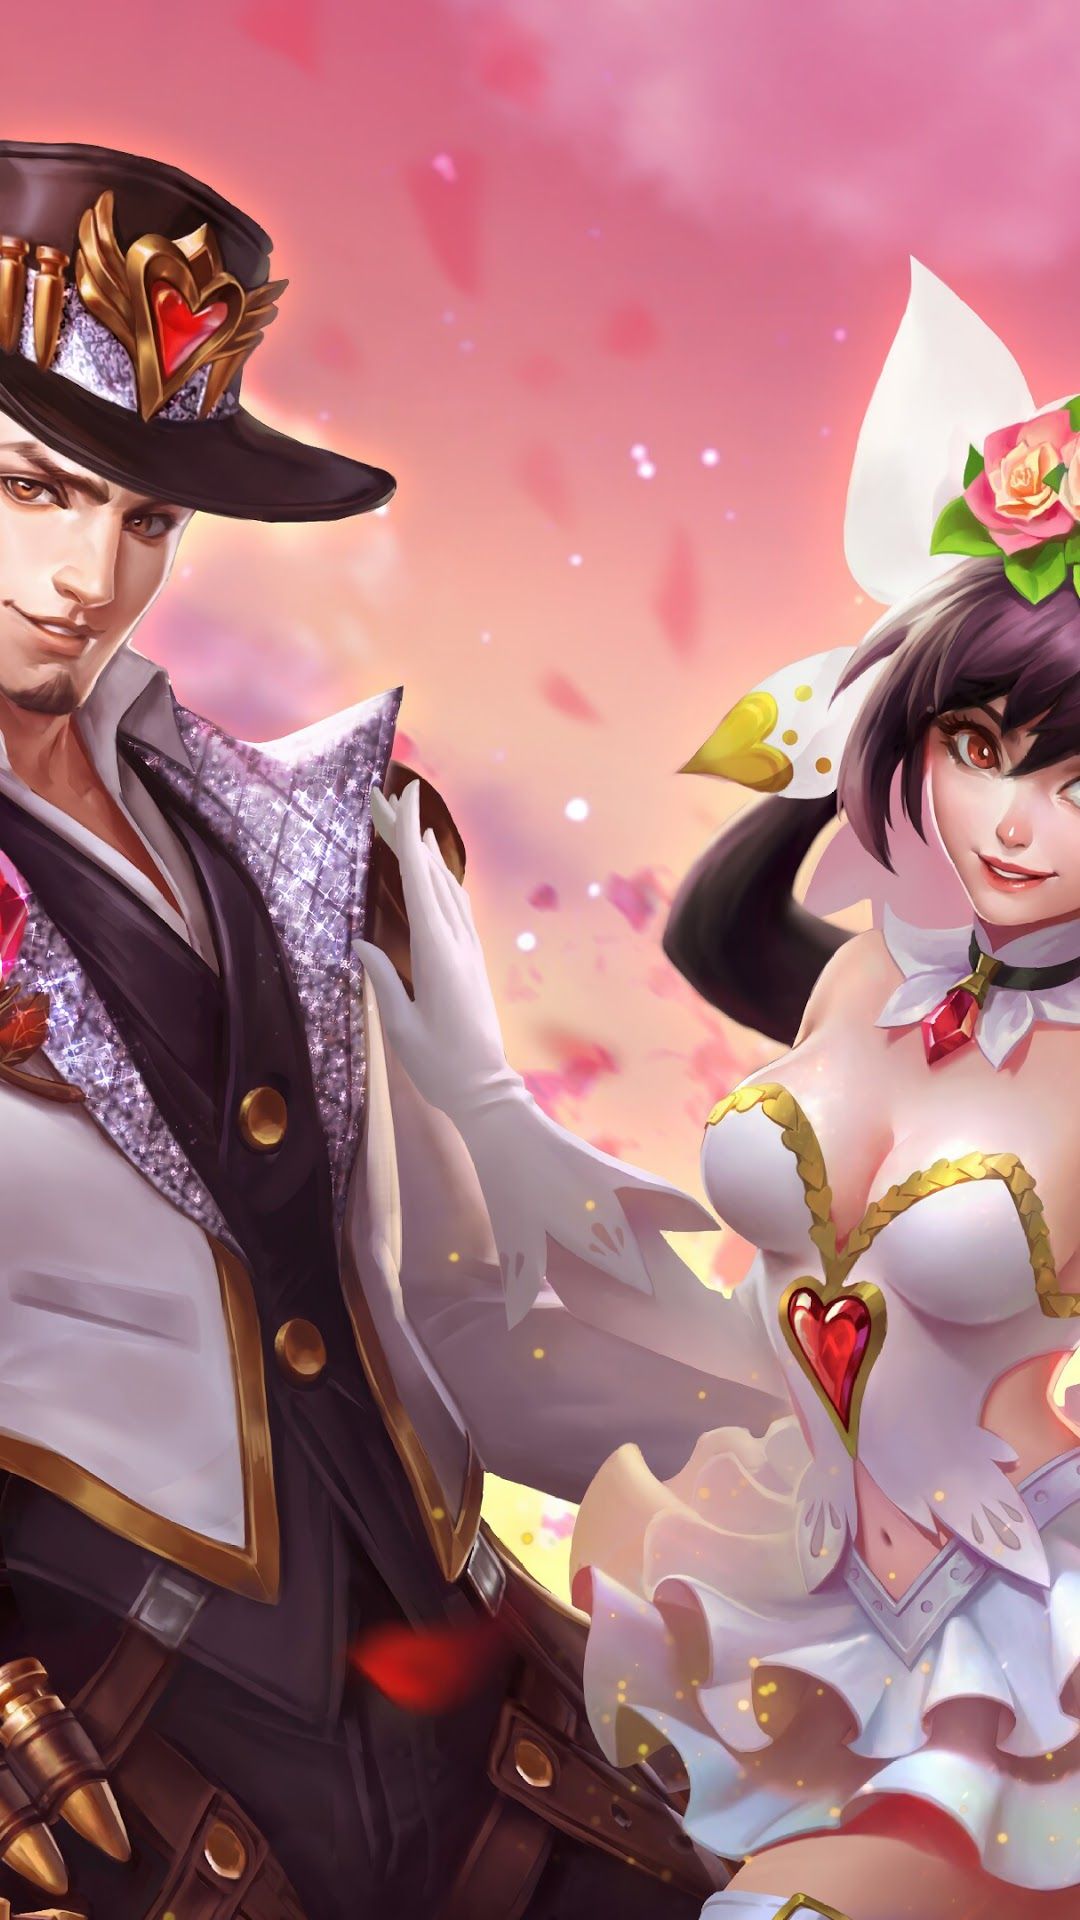 Clint, Gun and Roses, Layla, Cannon and Roses, Skins, Mobile Legends phone HD Wallpaper, Image, Background, Photo and Picture. Mocah HD Wallpaper